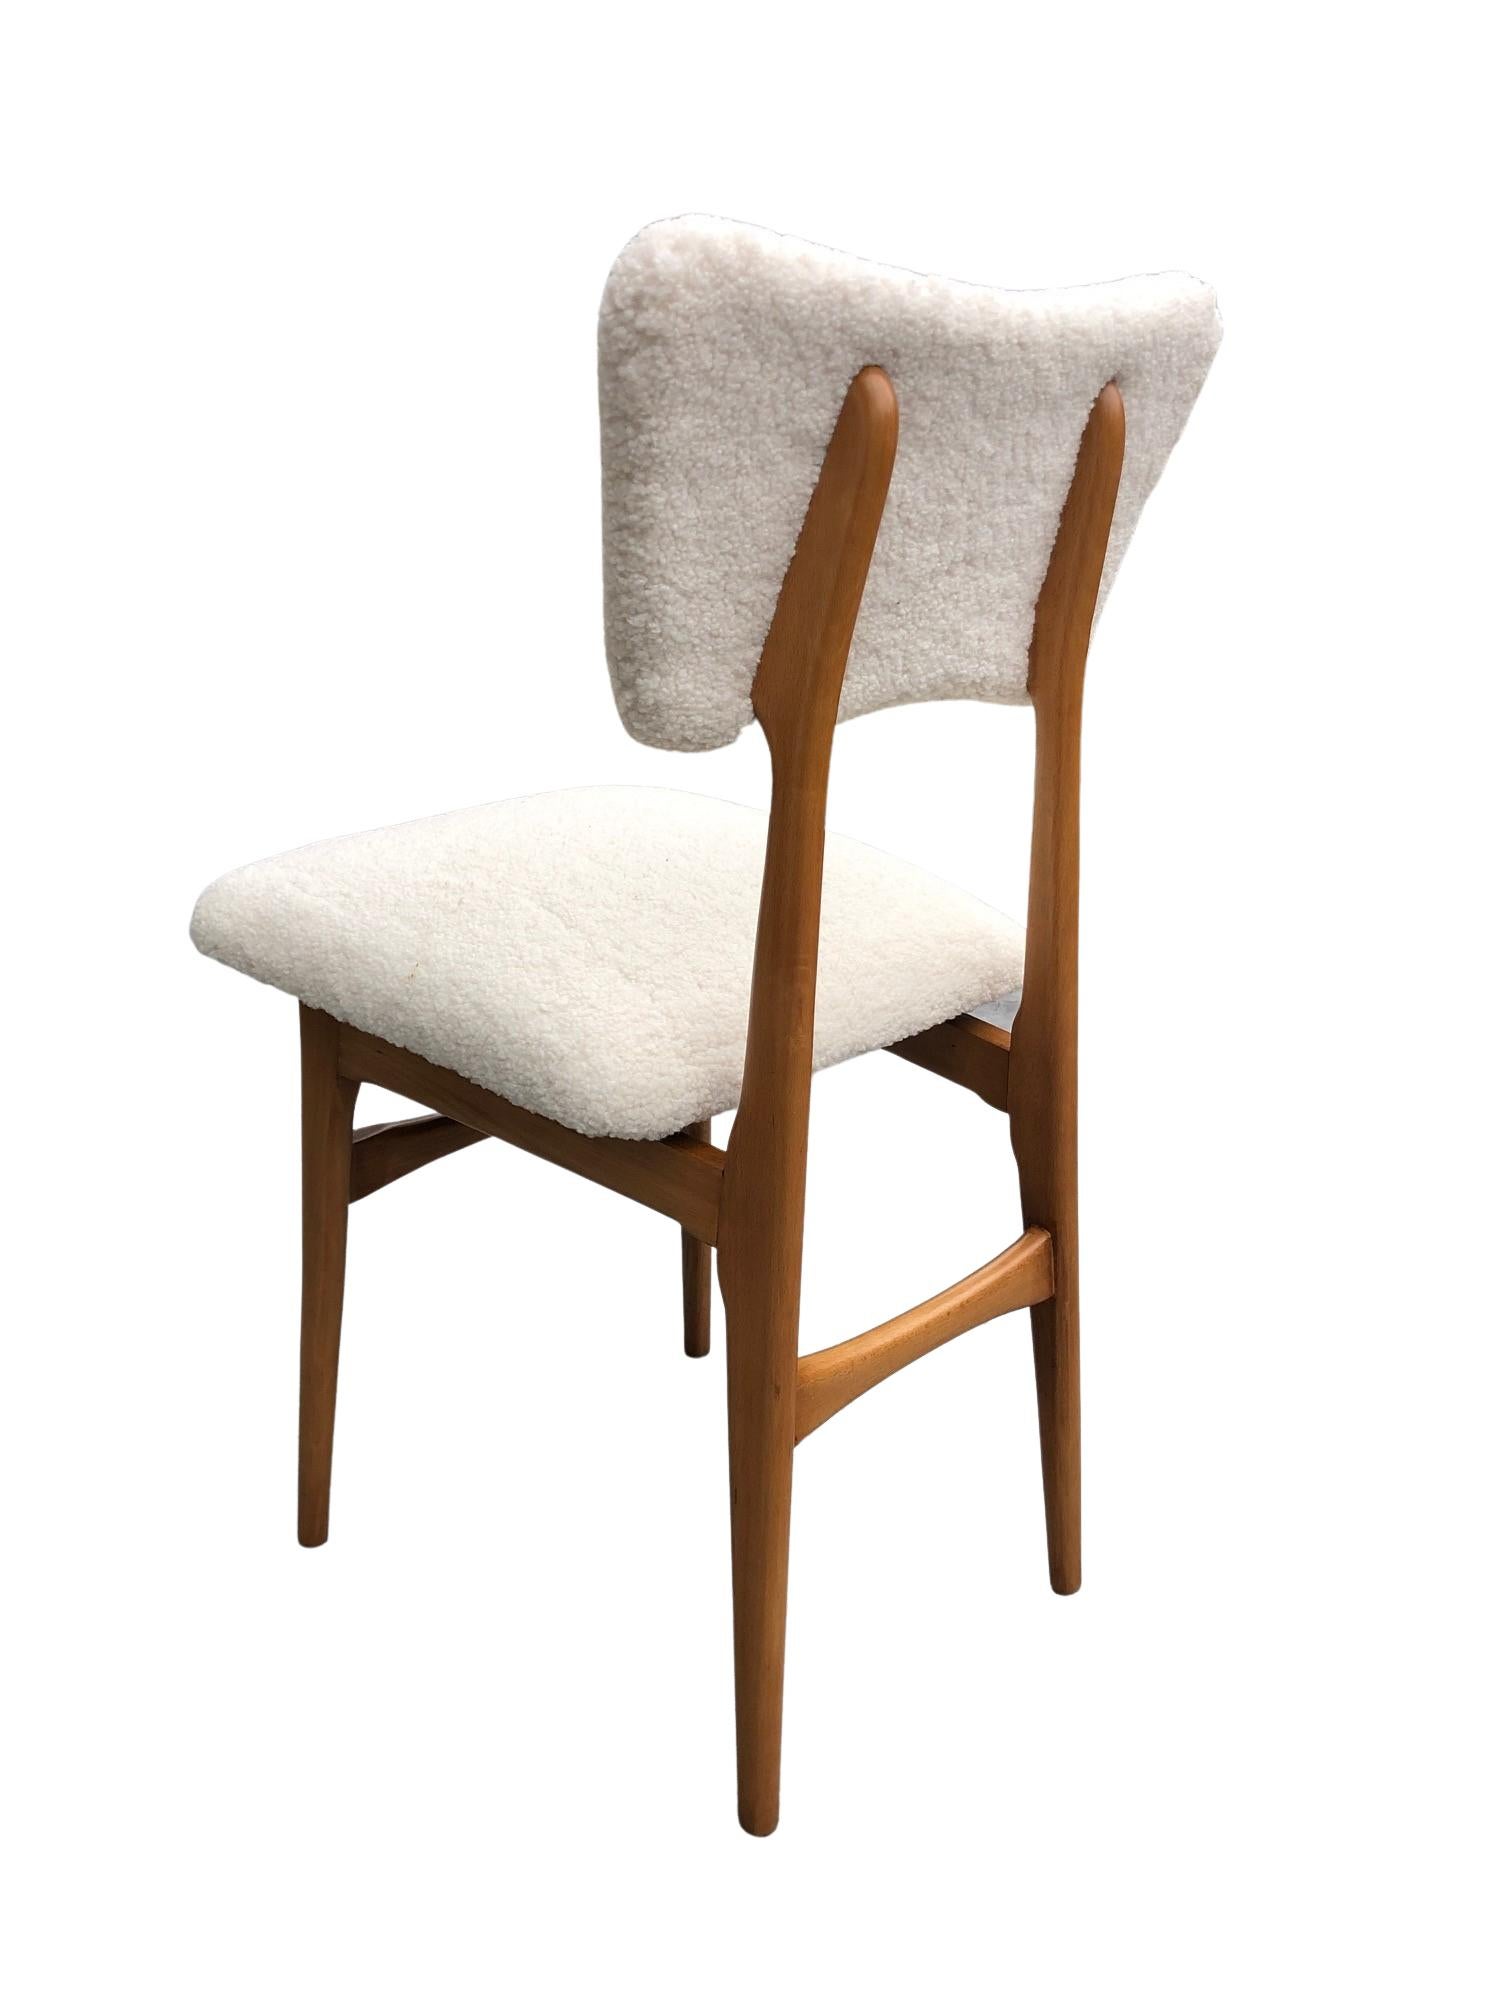 20th Century Midcentury Cream Bouclé and Wood Dining Chair, Europe, 1960s For Sale